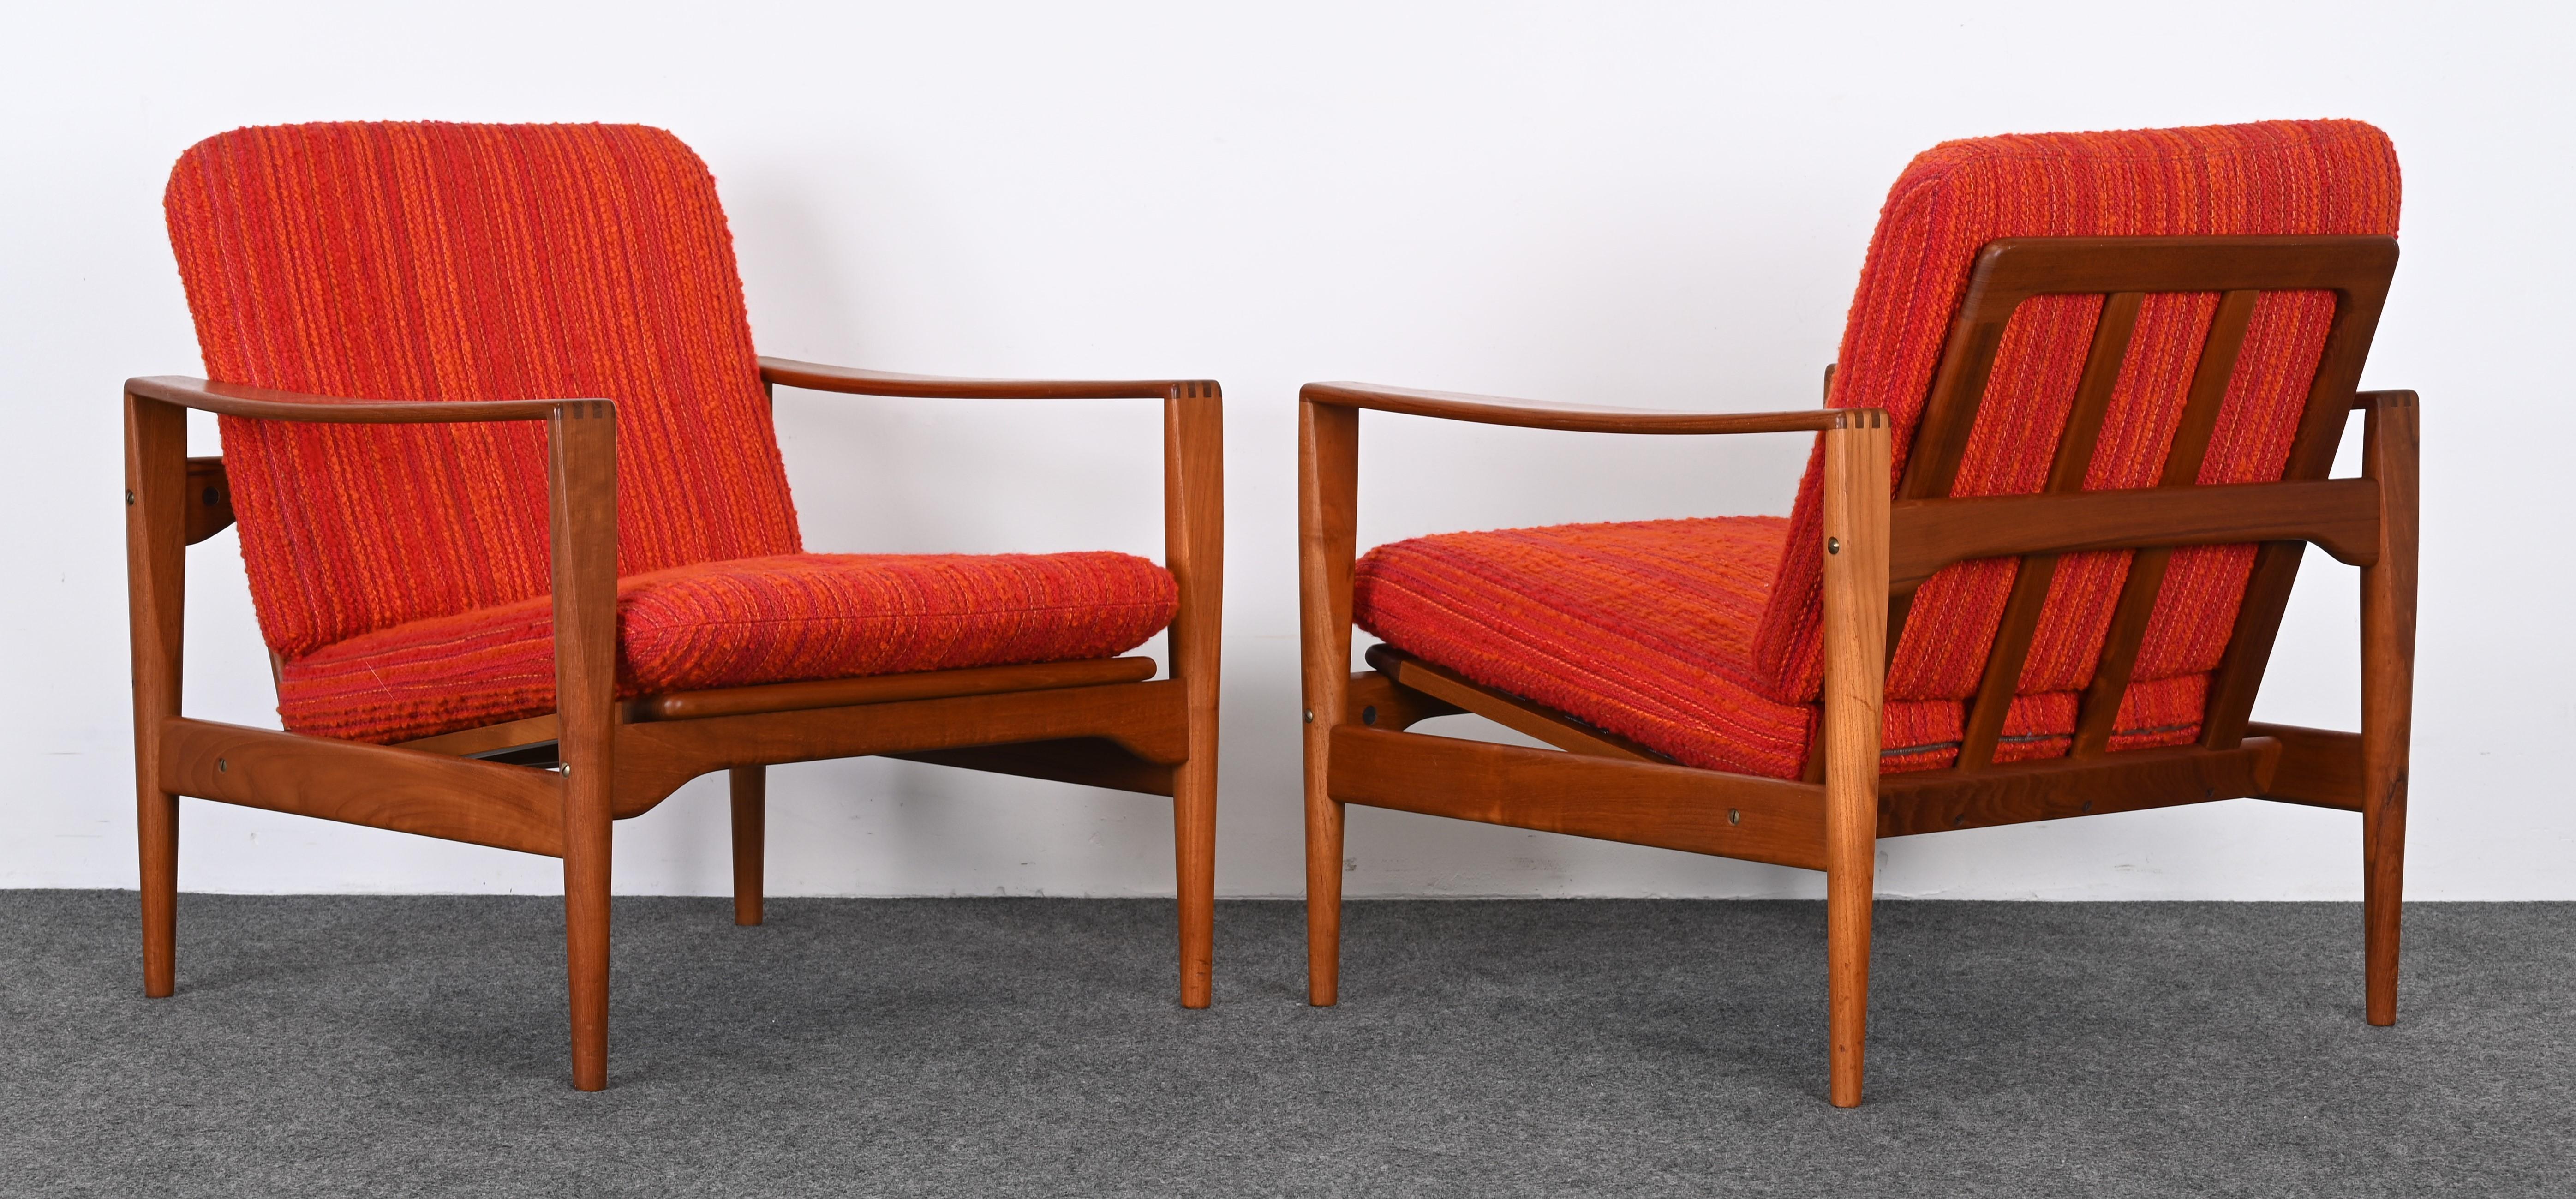 A Scandinavian Modern pair of Easy Chairs by Illum Wikkelso for Niels Eilersen. The pair of teak armchairs are covered with the original multi-colored fabric similar to boucle. The elegant pair of lounge chairs have new strapping, as shown in the